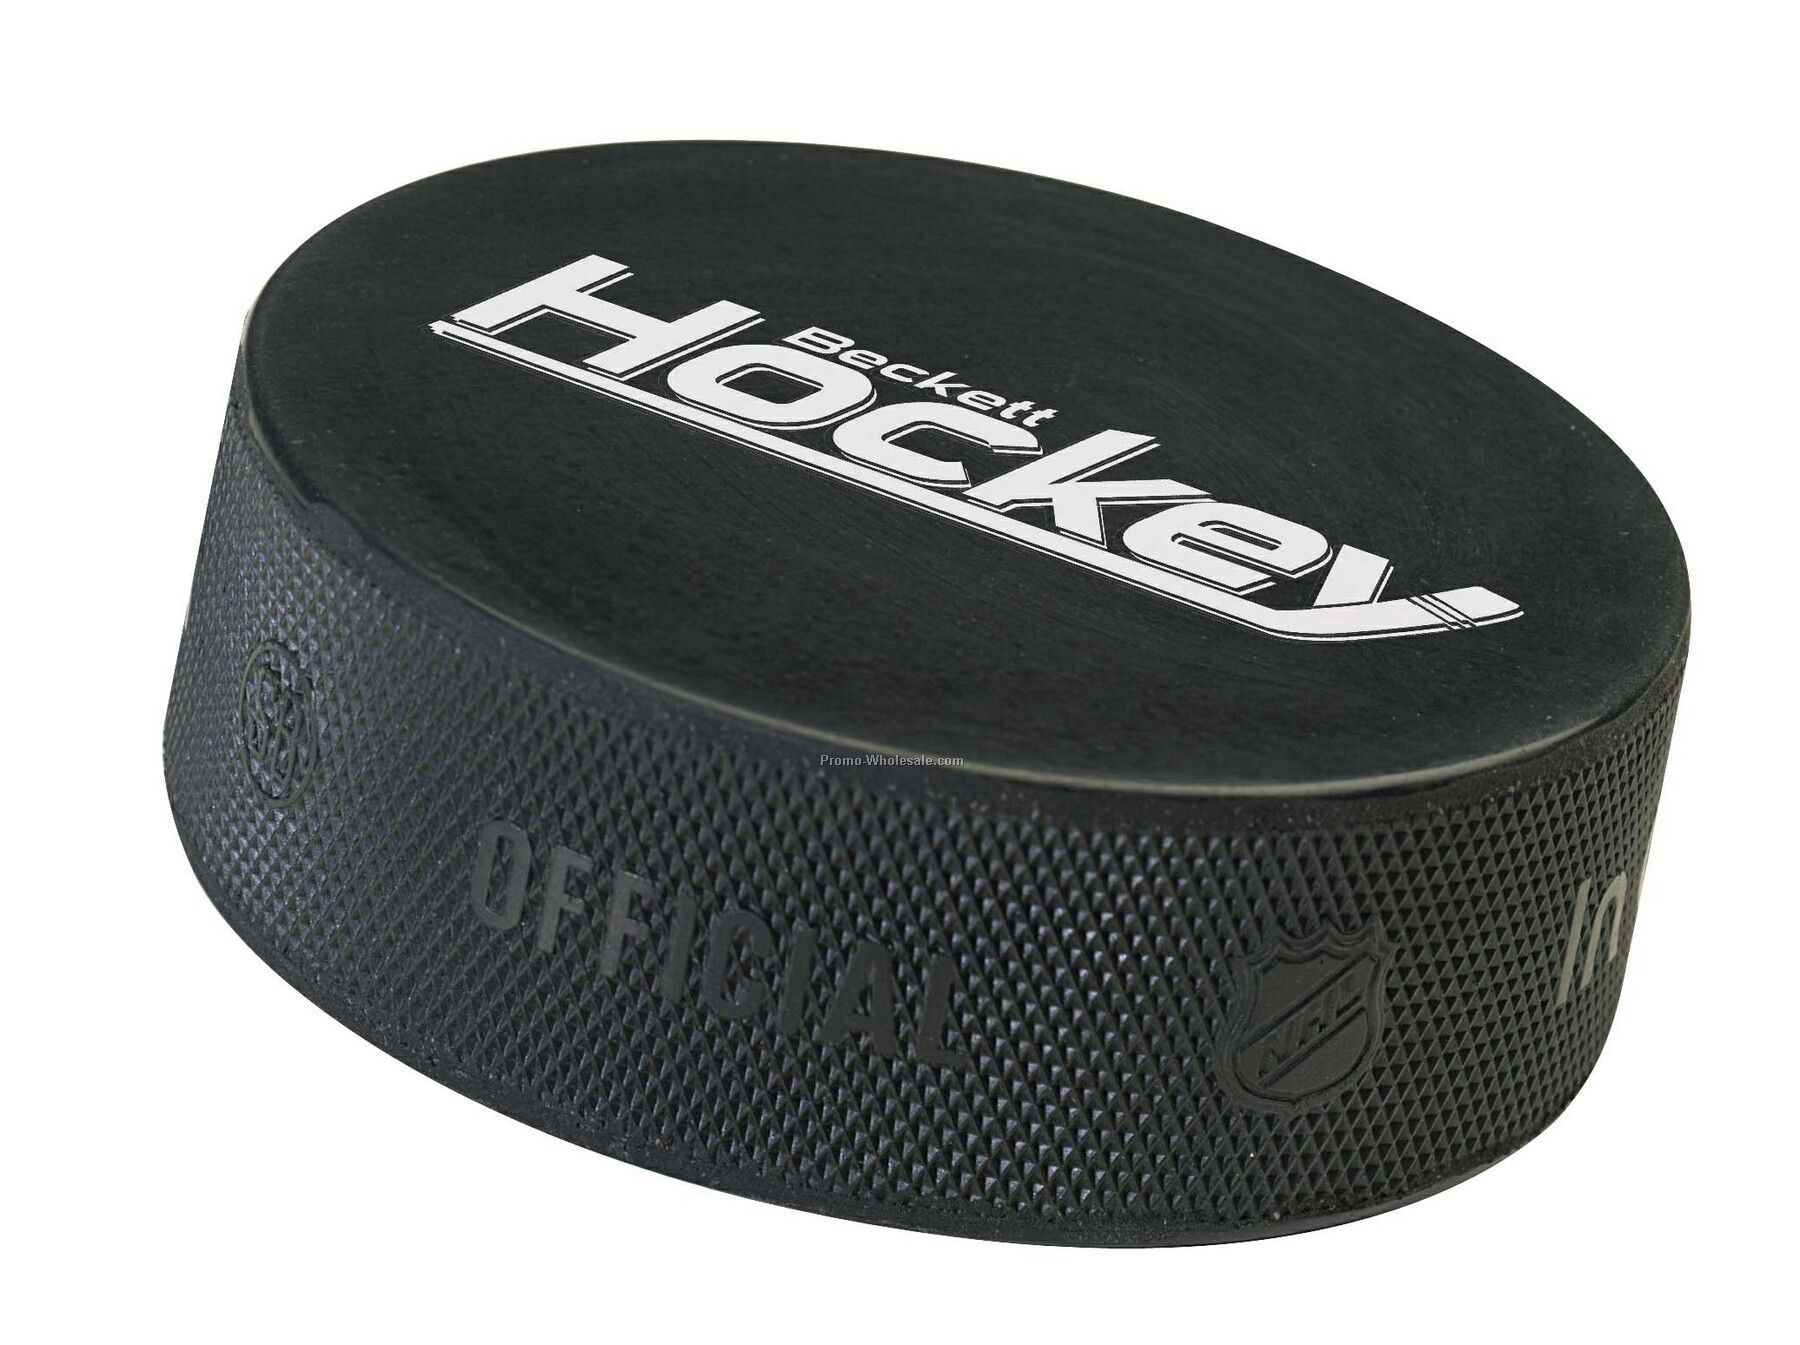 Action-Line-Official-Nhl-Hockey-Puck_20090804944.jpg